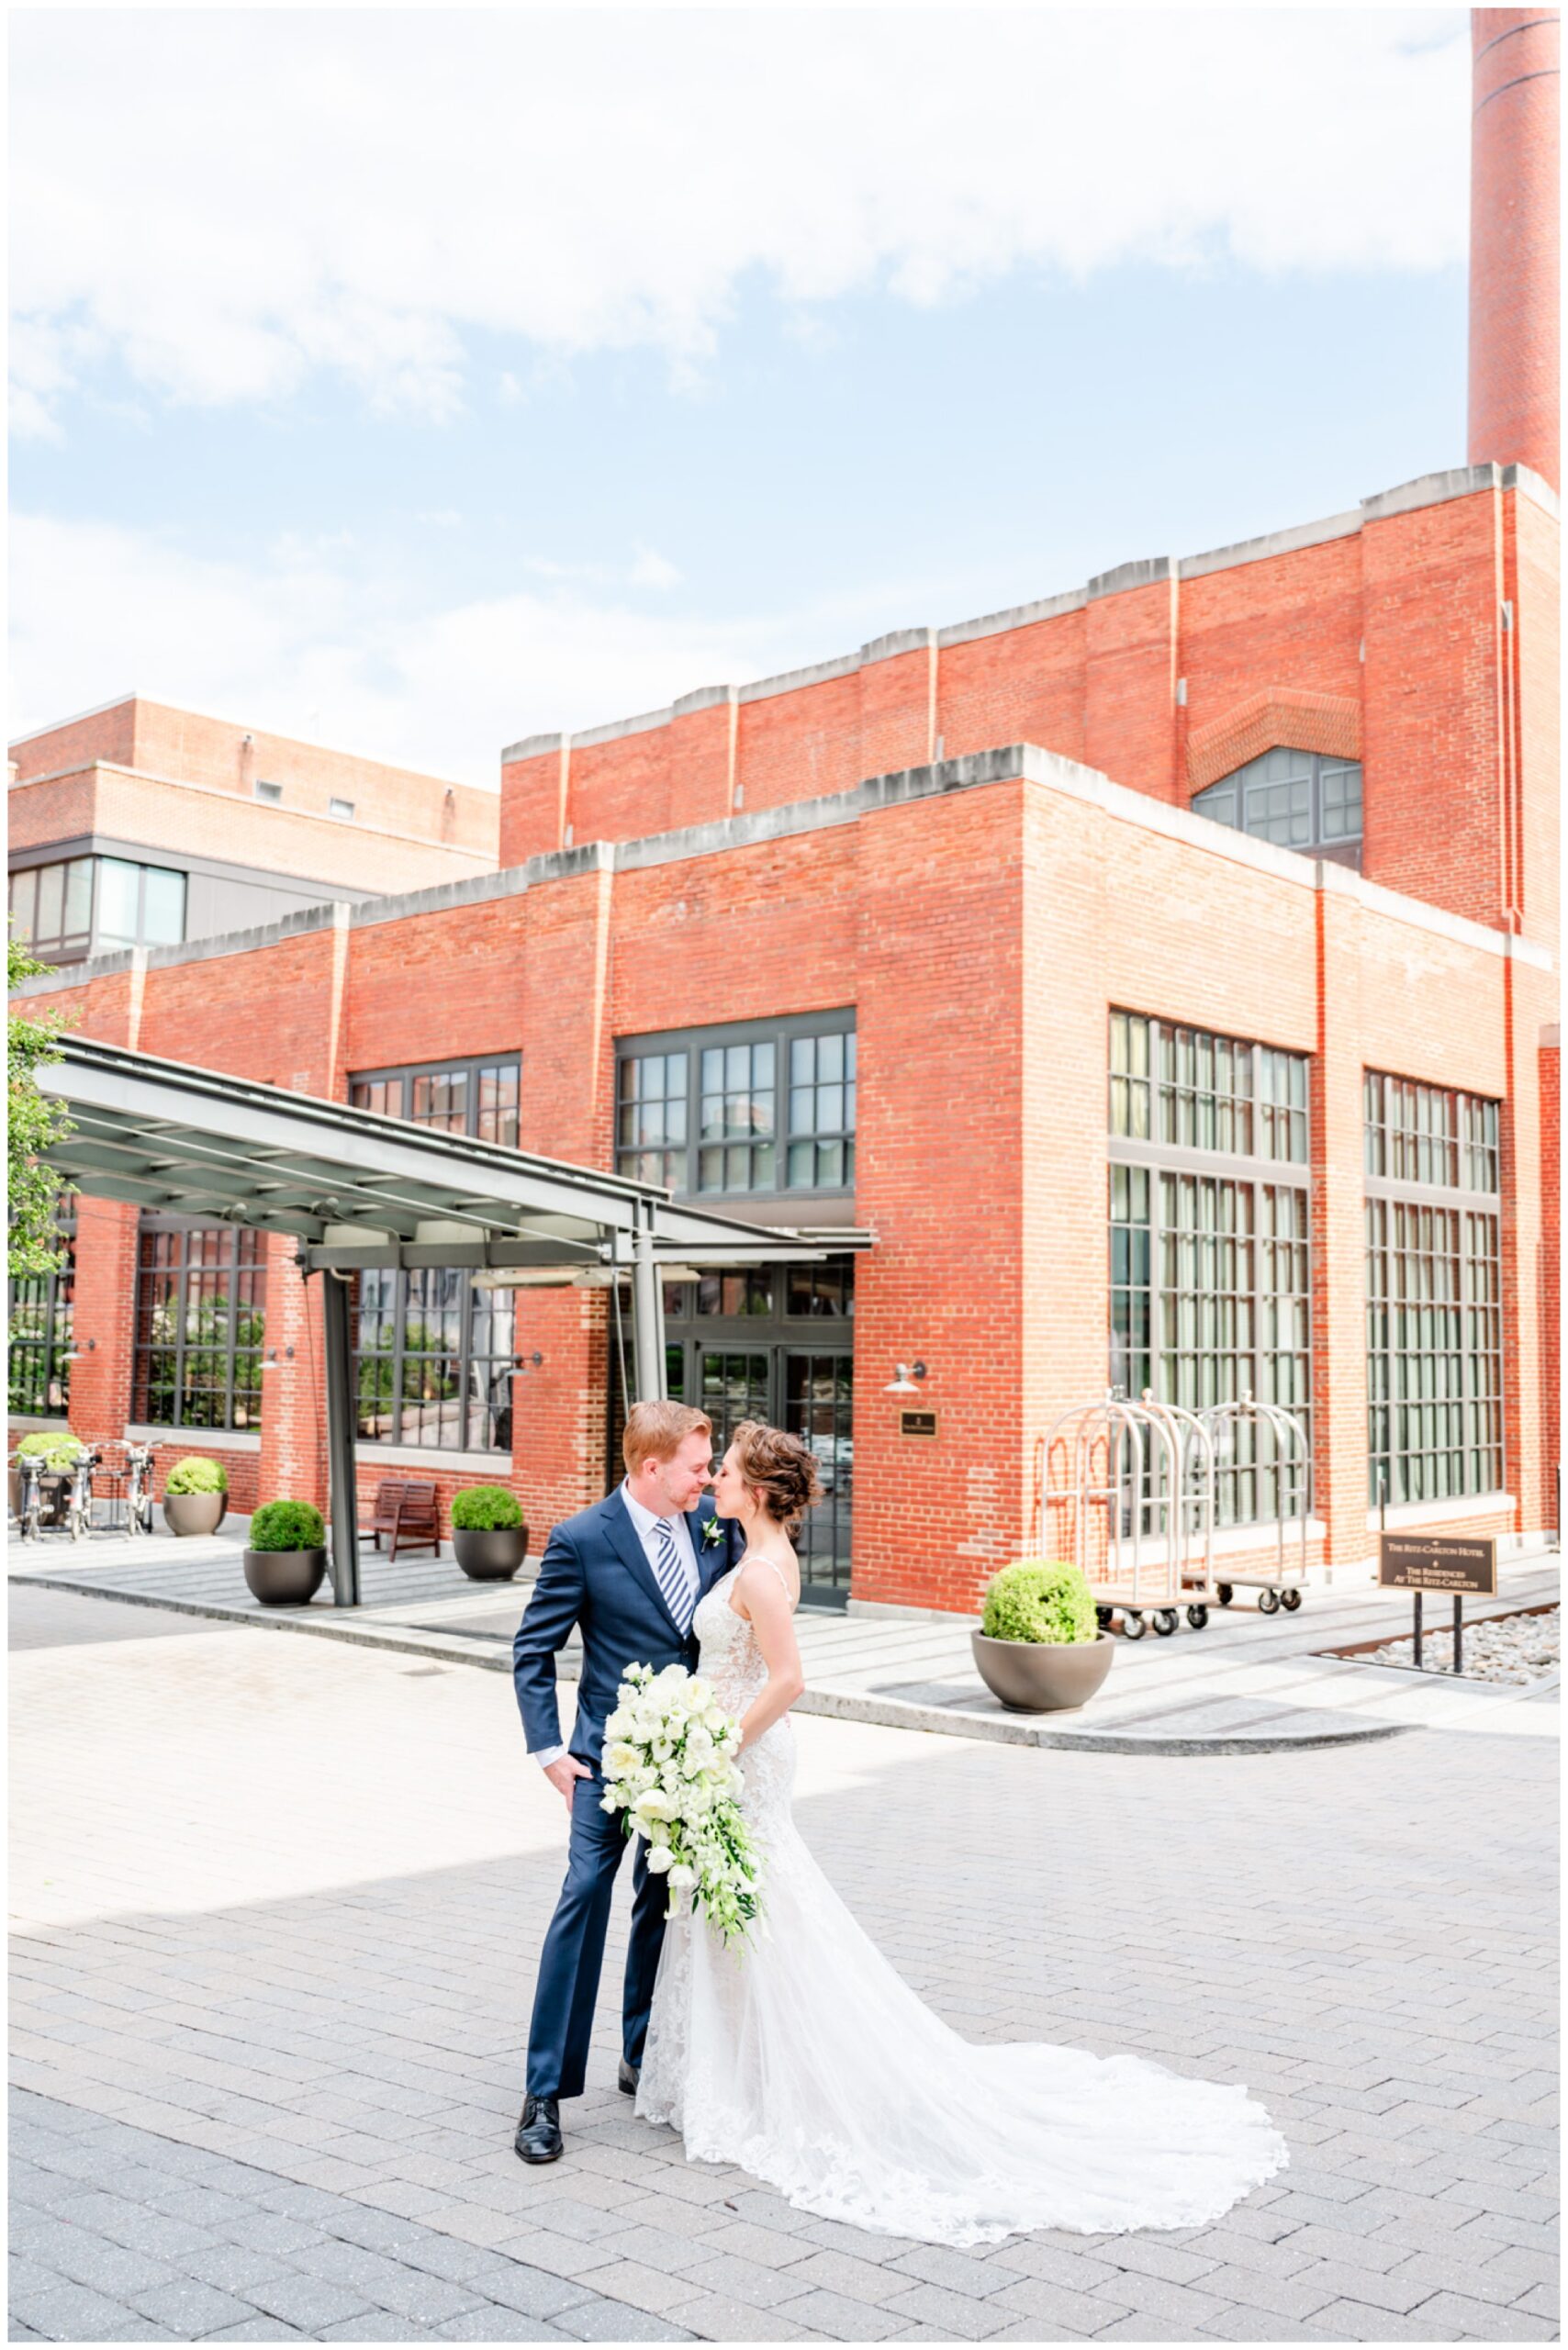 romantic Ritz Carlton Georgetown wedding, summer wedding aesthetic, green and white aesthetic, summer D.C. wedding, D.C. wedding venues, Ritz Carlton wedding, Washington D.C. wedding, romantic wedding aesthetic, Georgetown wedding, Rachel E.H. Photography, D.C. photographer, bride and groom almost kissing, bride and groom smiling at each other